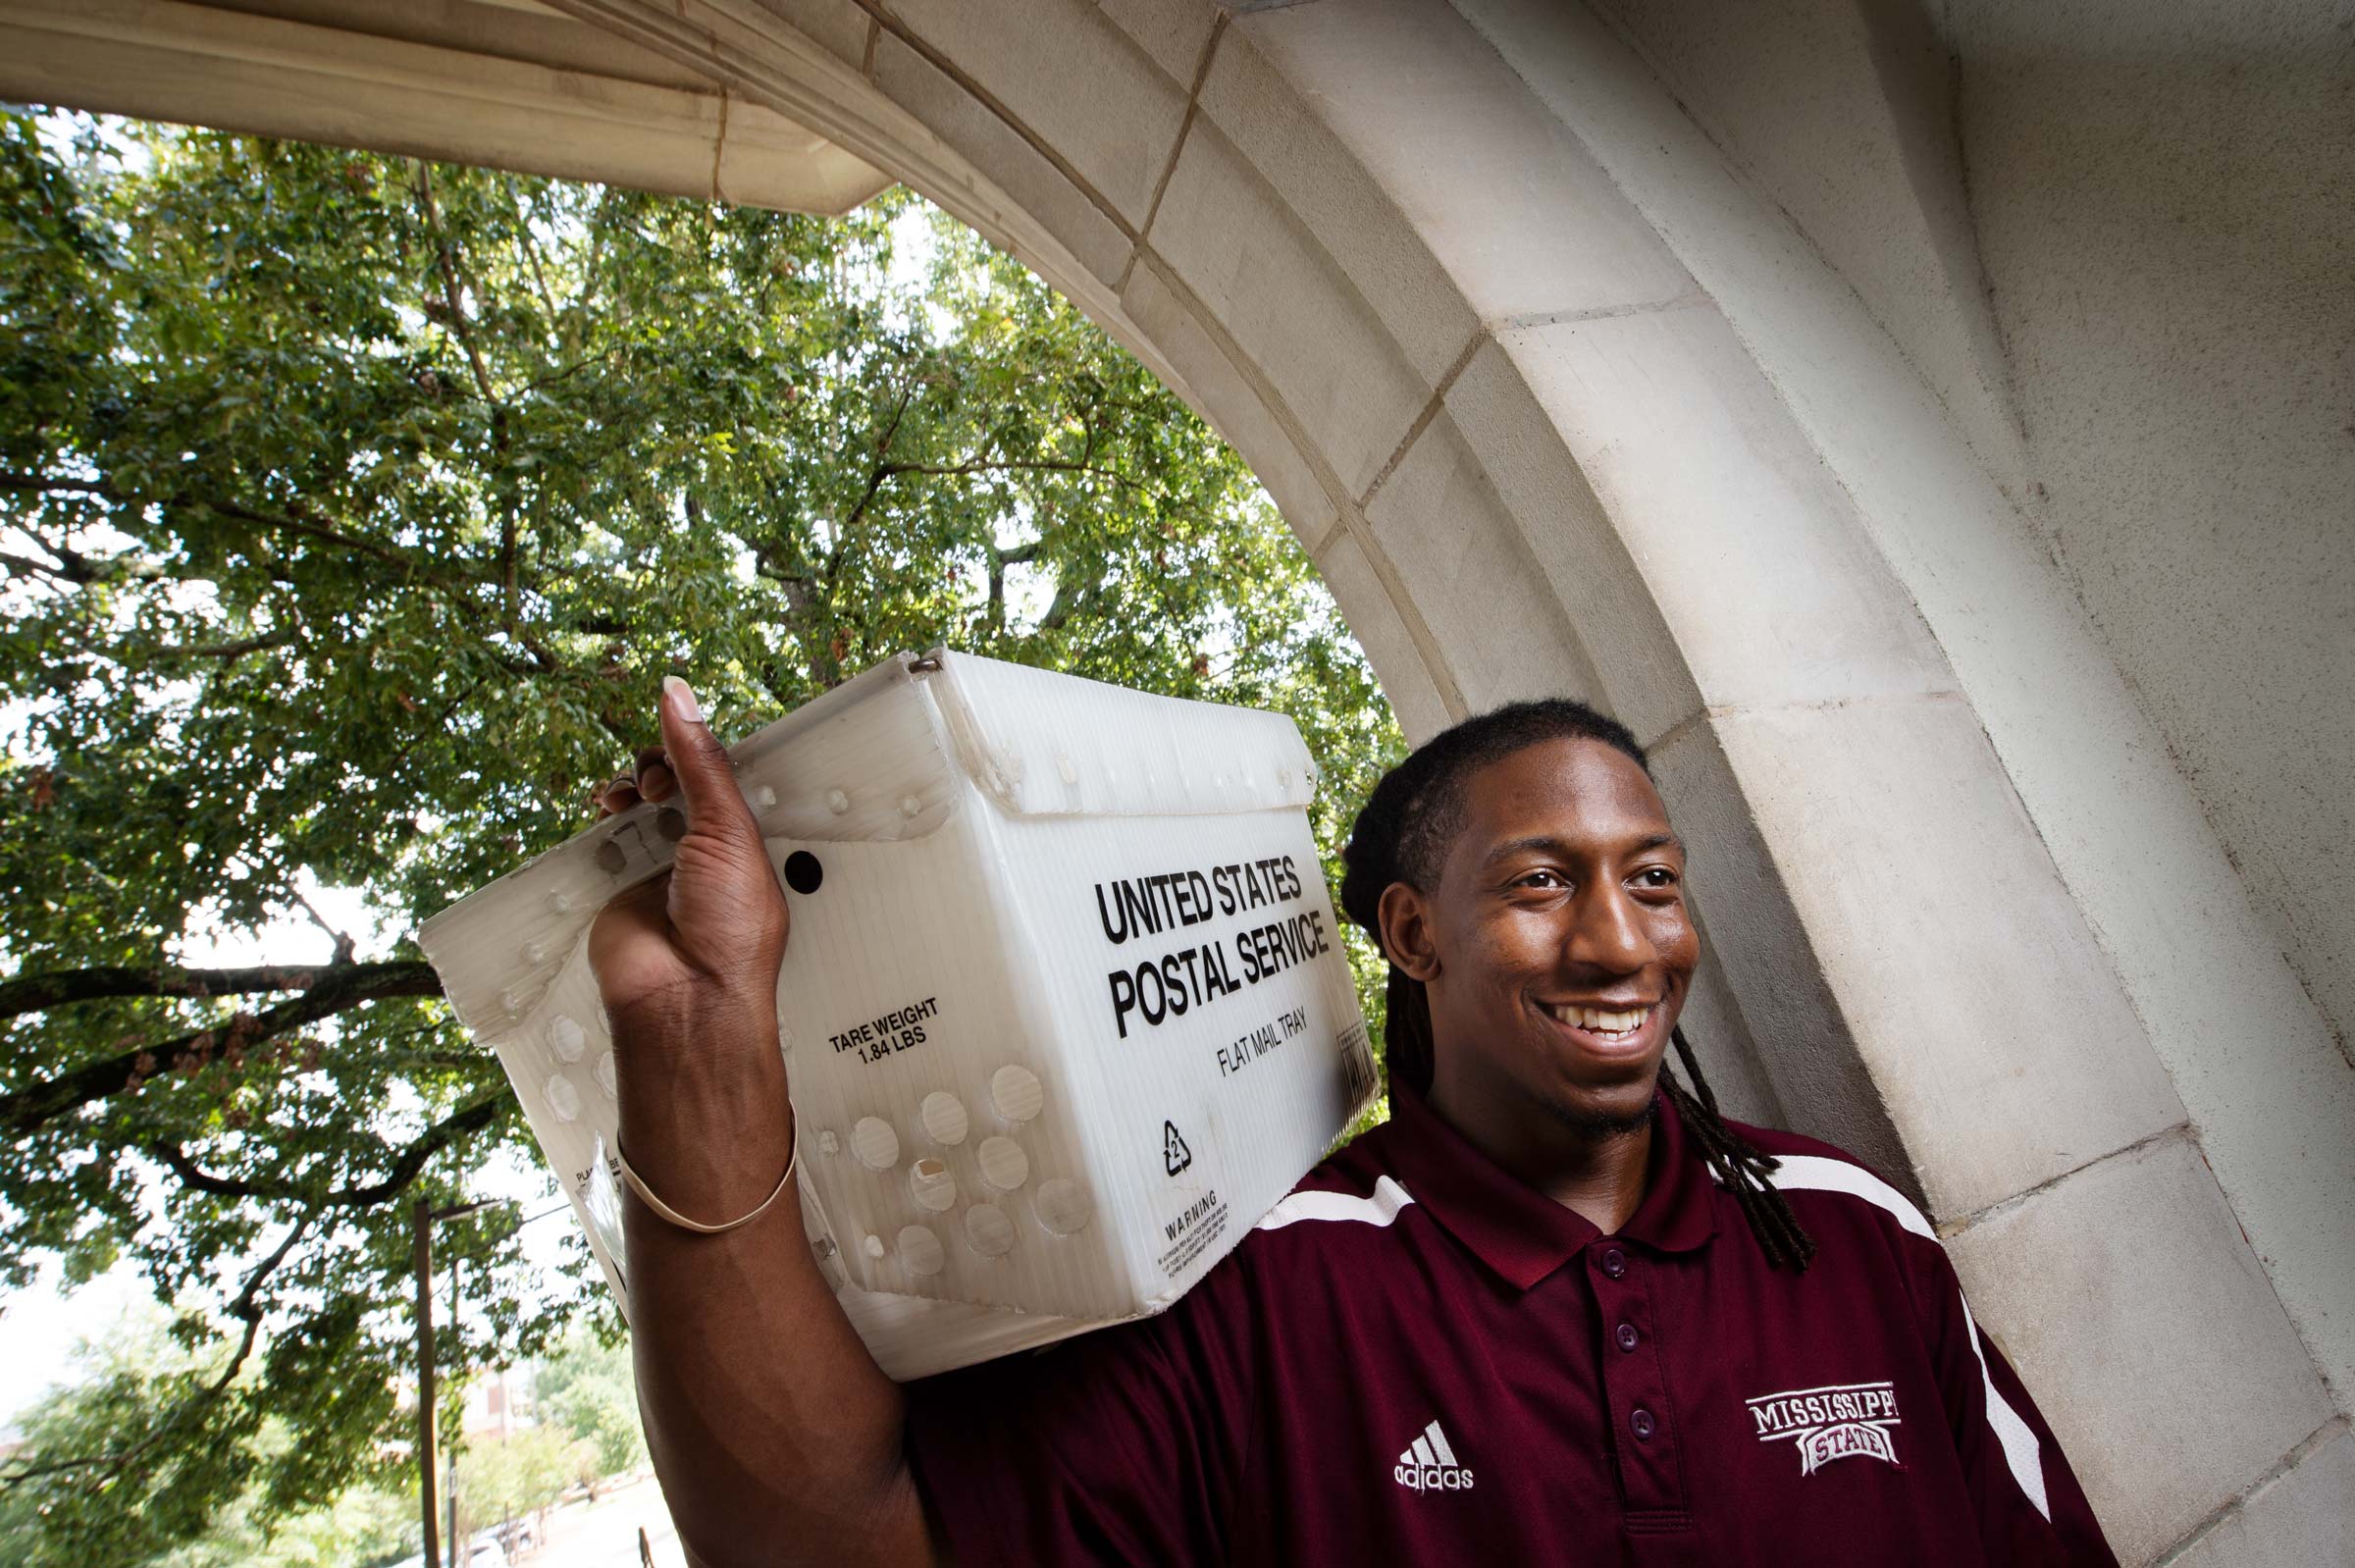 J.R. Love, pictured carrying a mail container on the MSU campus.